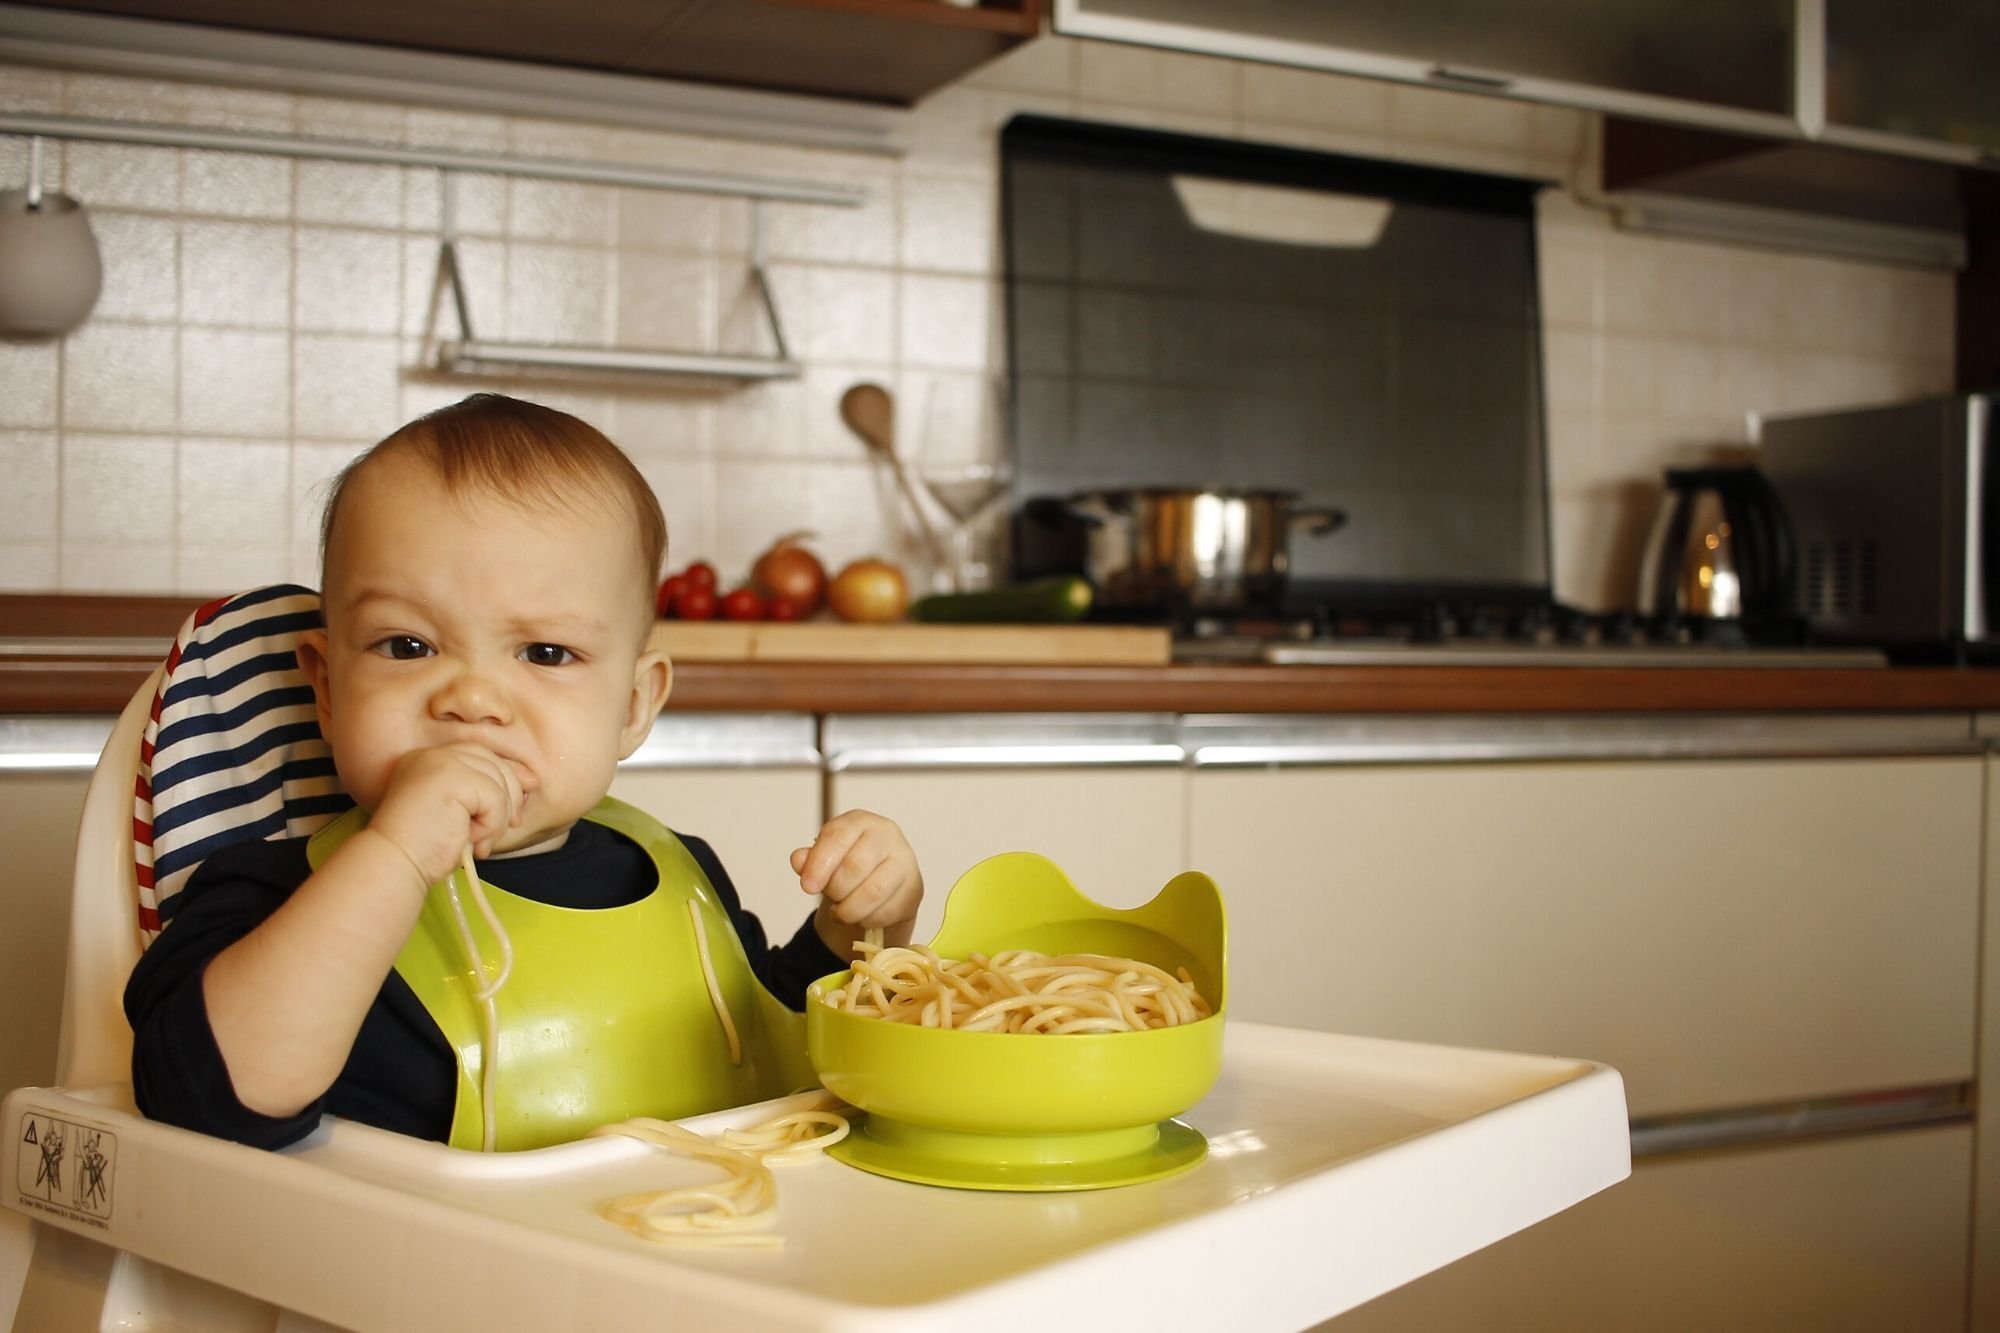 Toddler in a highchair eating pasta from a green bowl